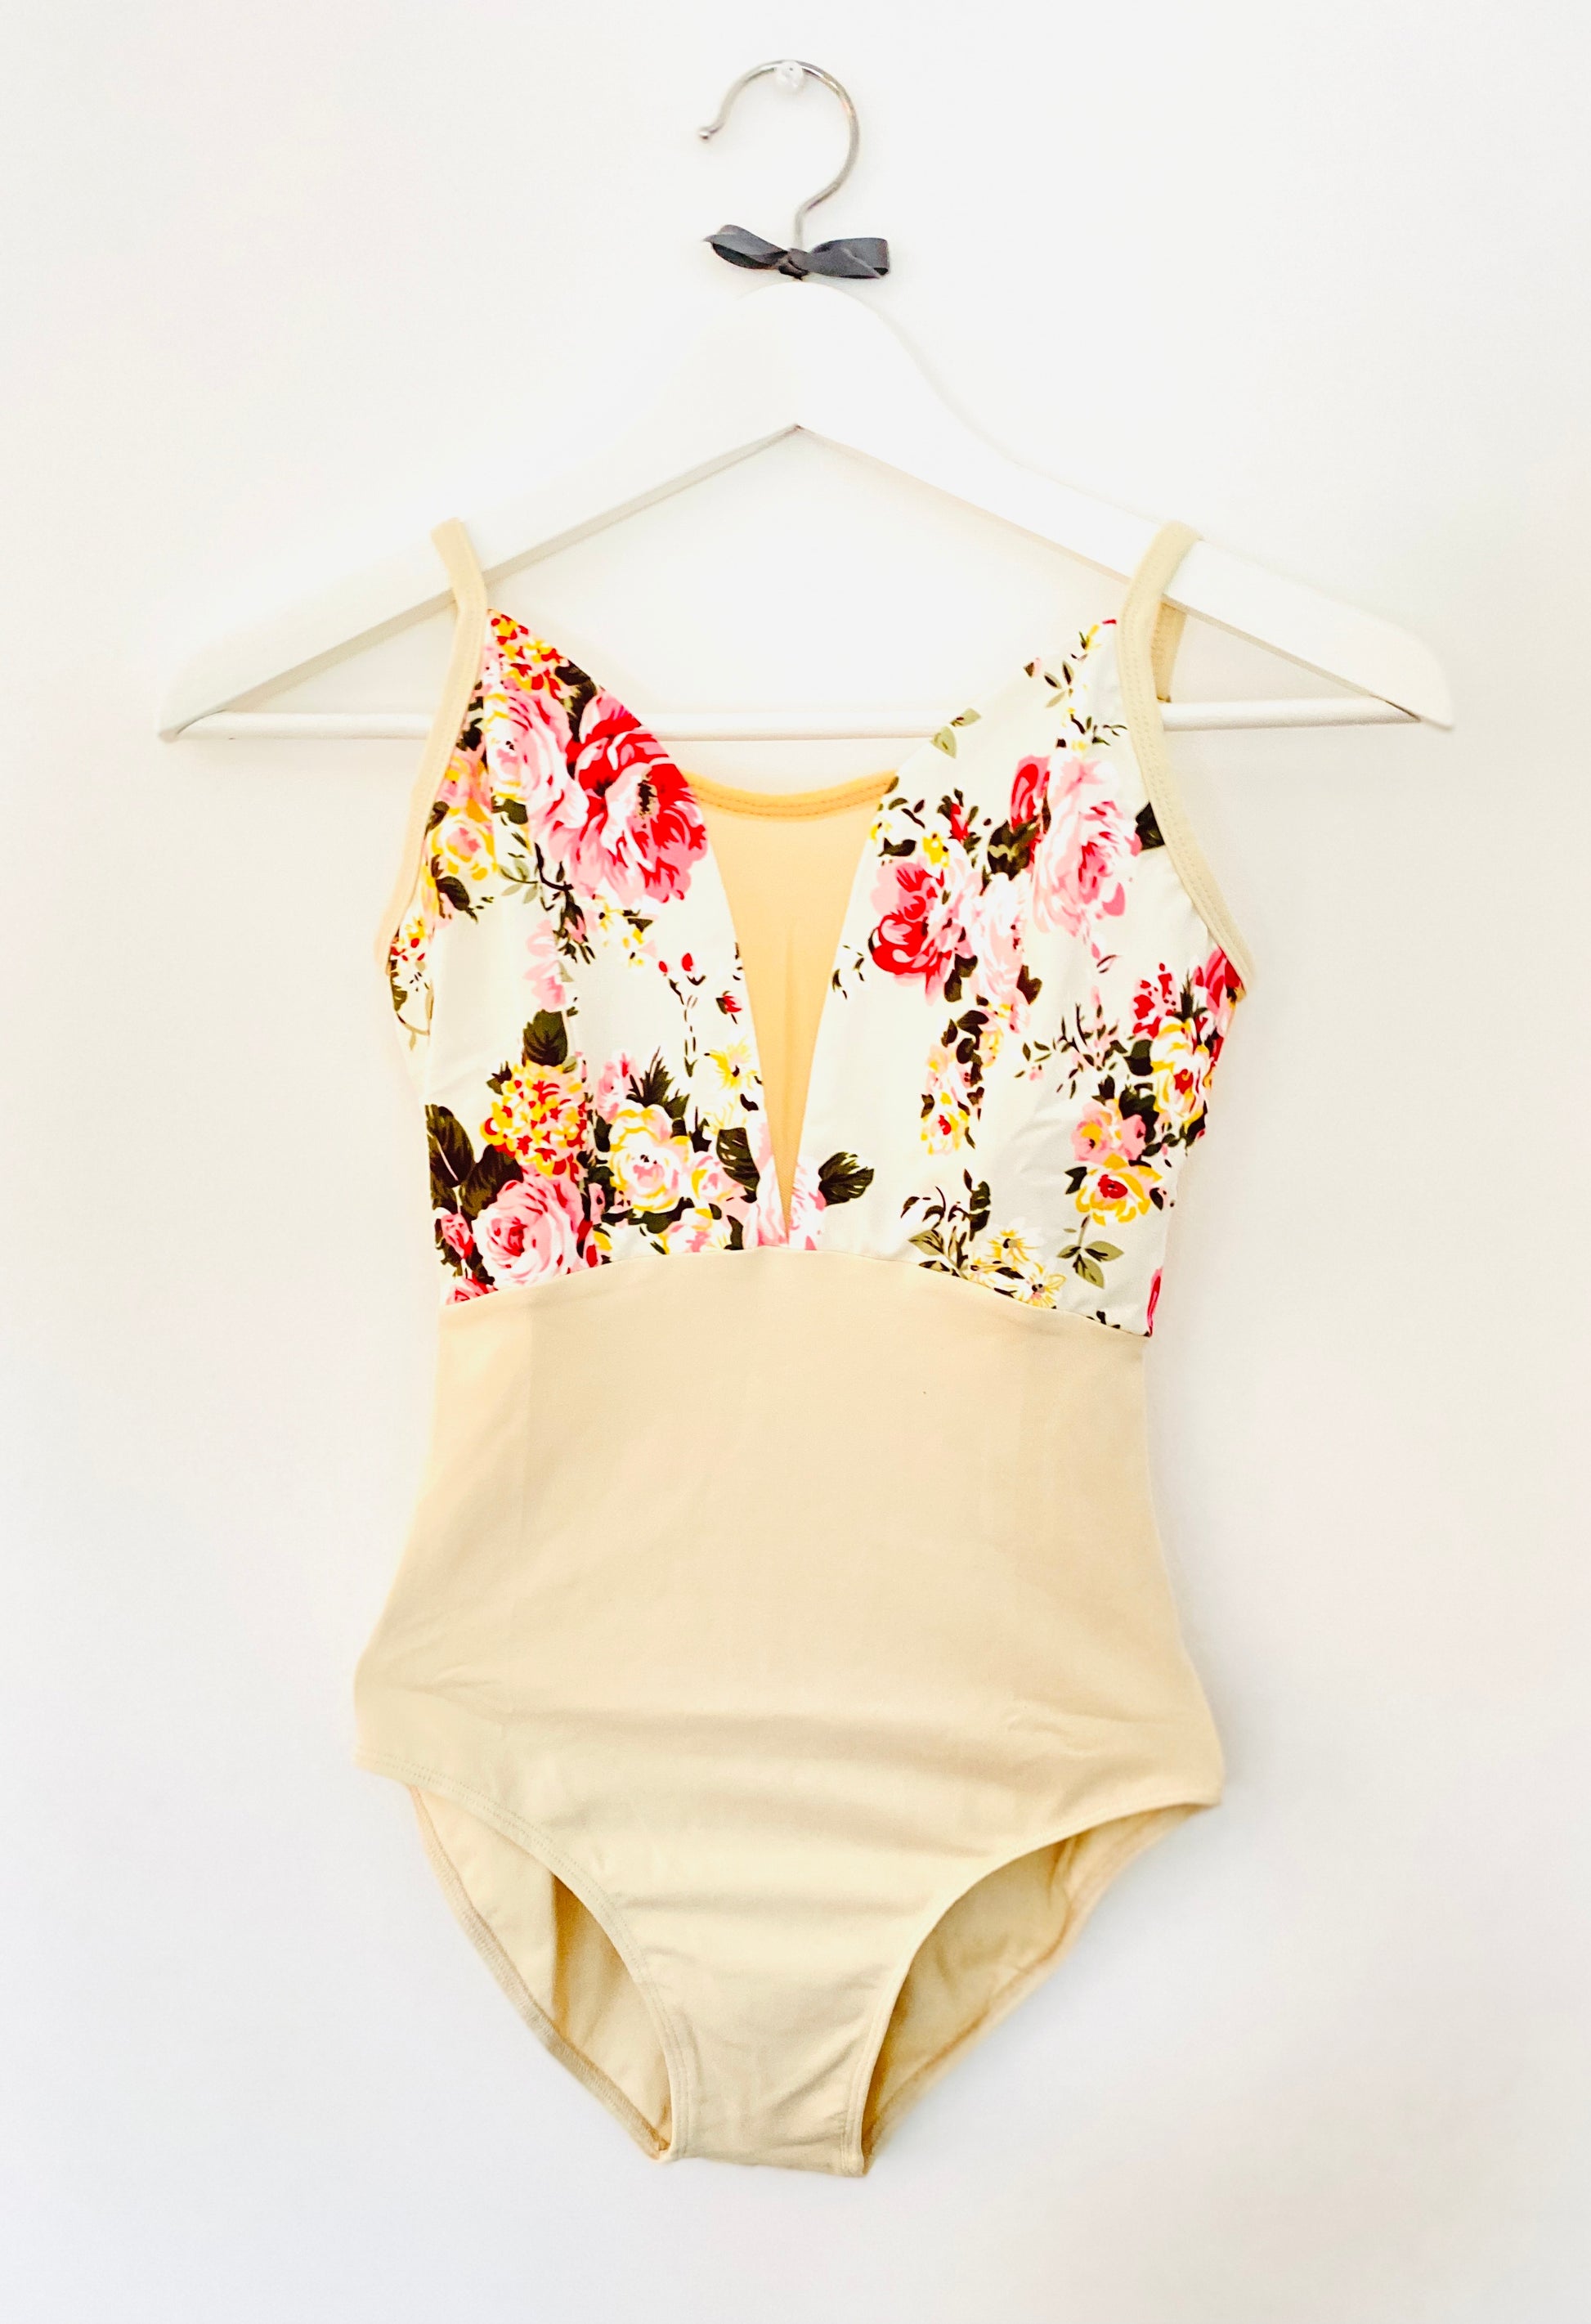 V-mesh camisole leotard in buttermilk with  floral print from the collective dancewear